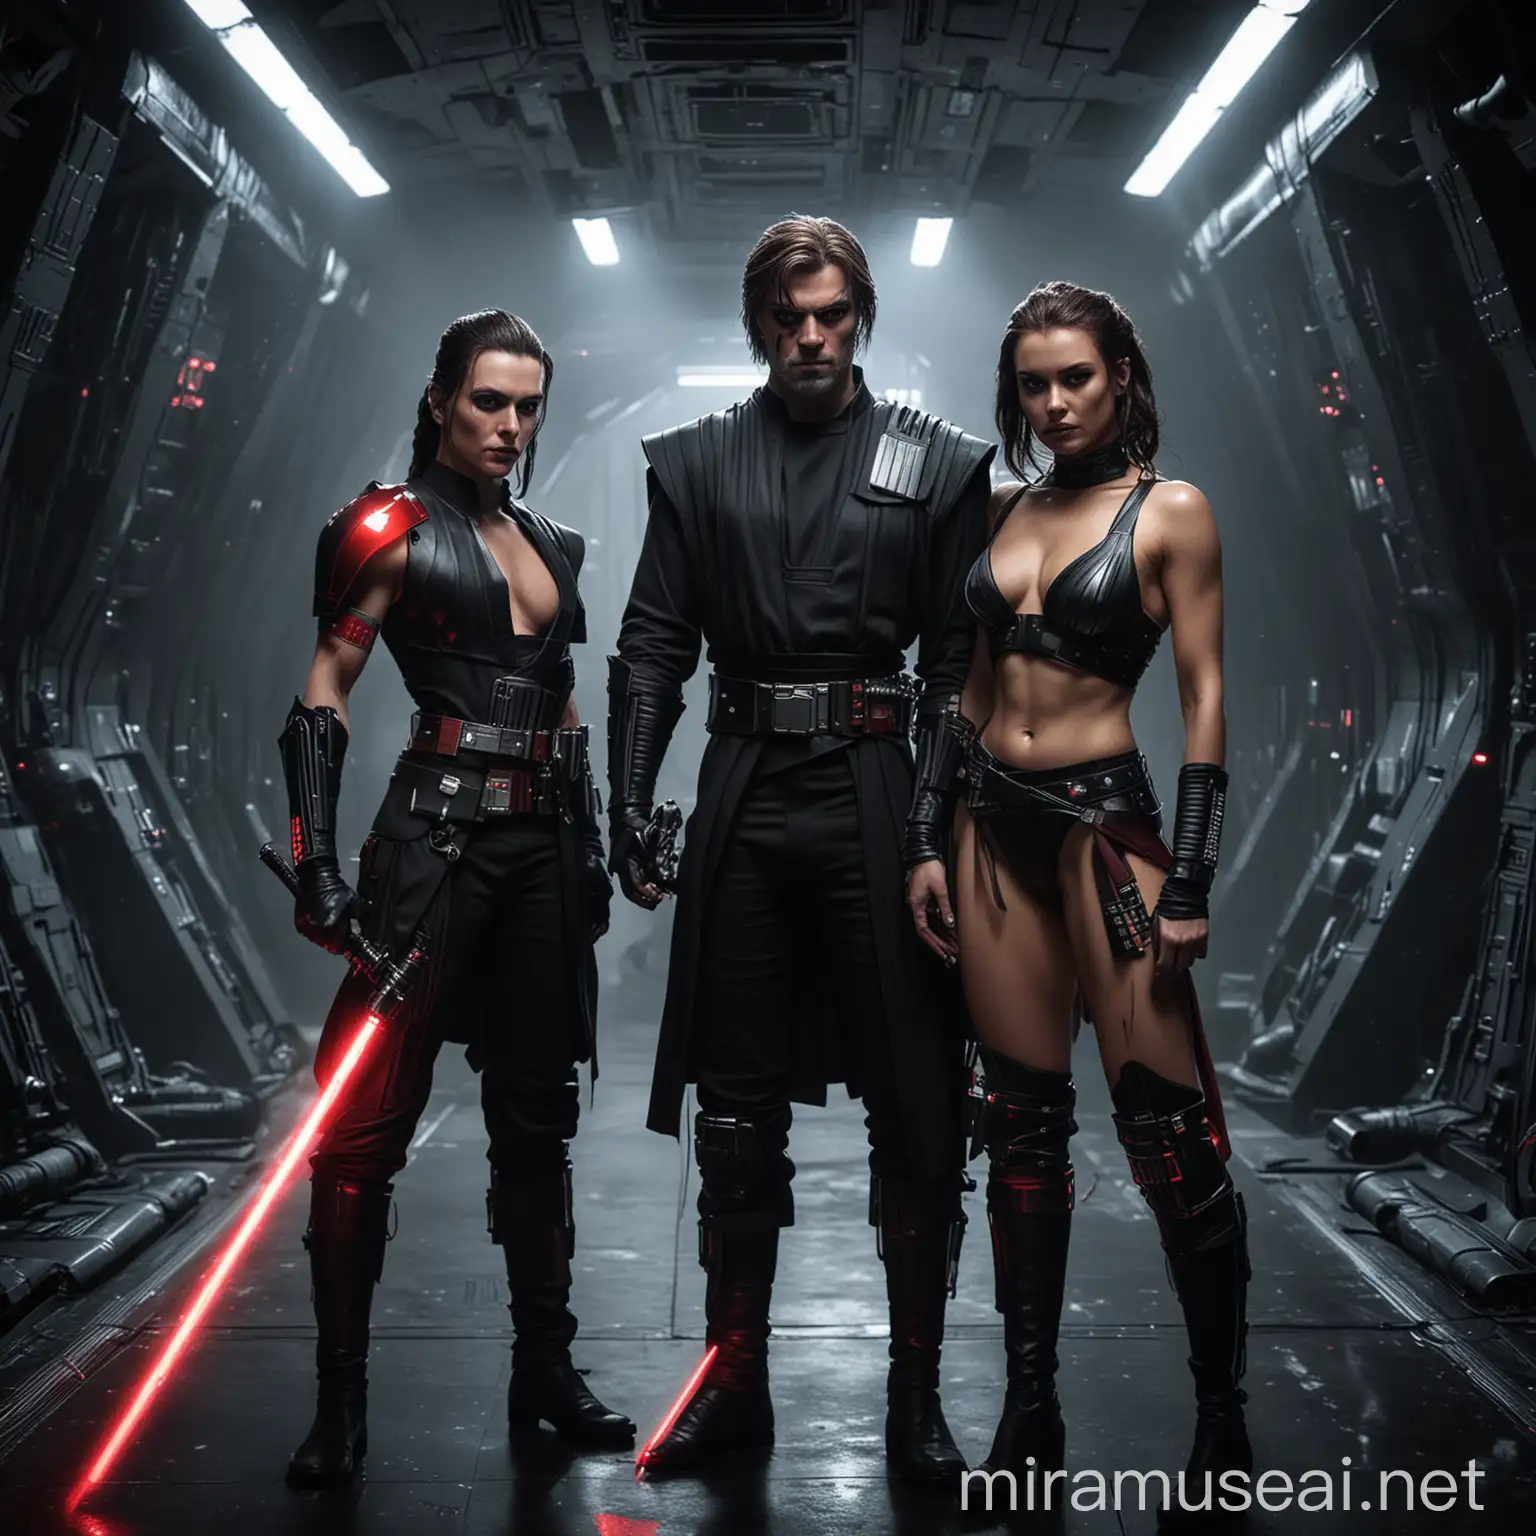 Male sith lord and a sexy female sith lord with hot booty. Standing next to eachother. lightsabers drawn. looking mean. Dark surroundings on a spaceship.